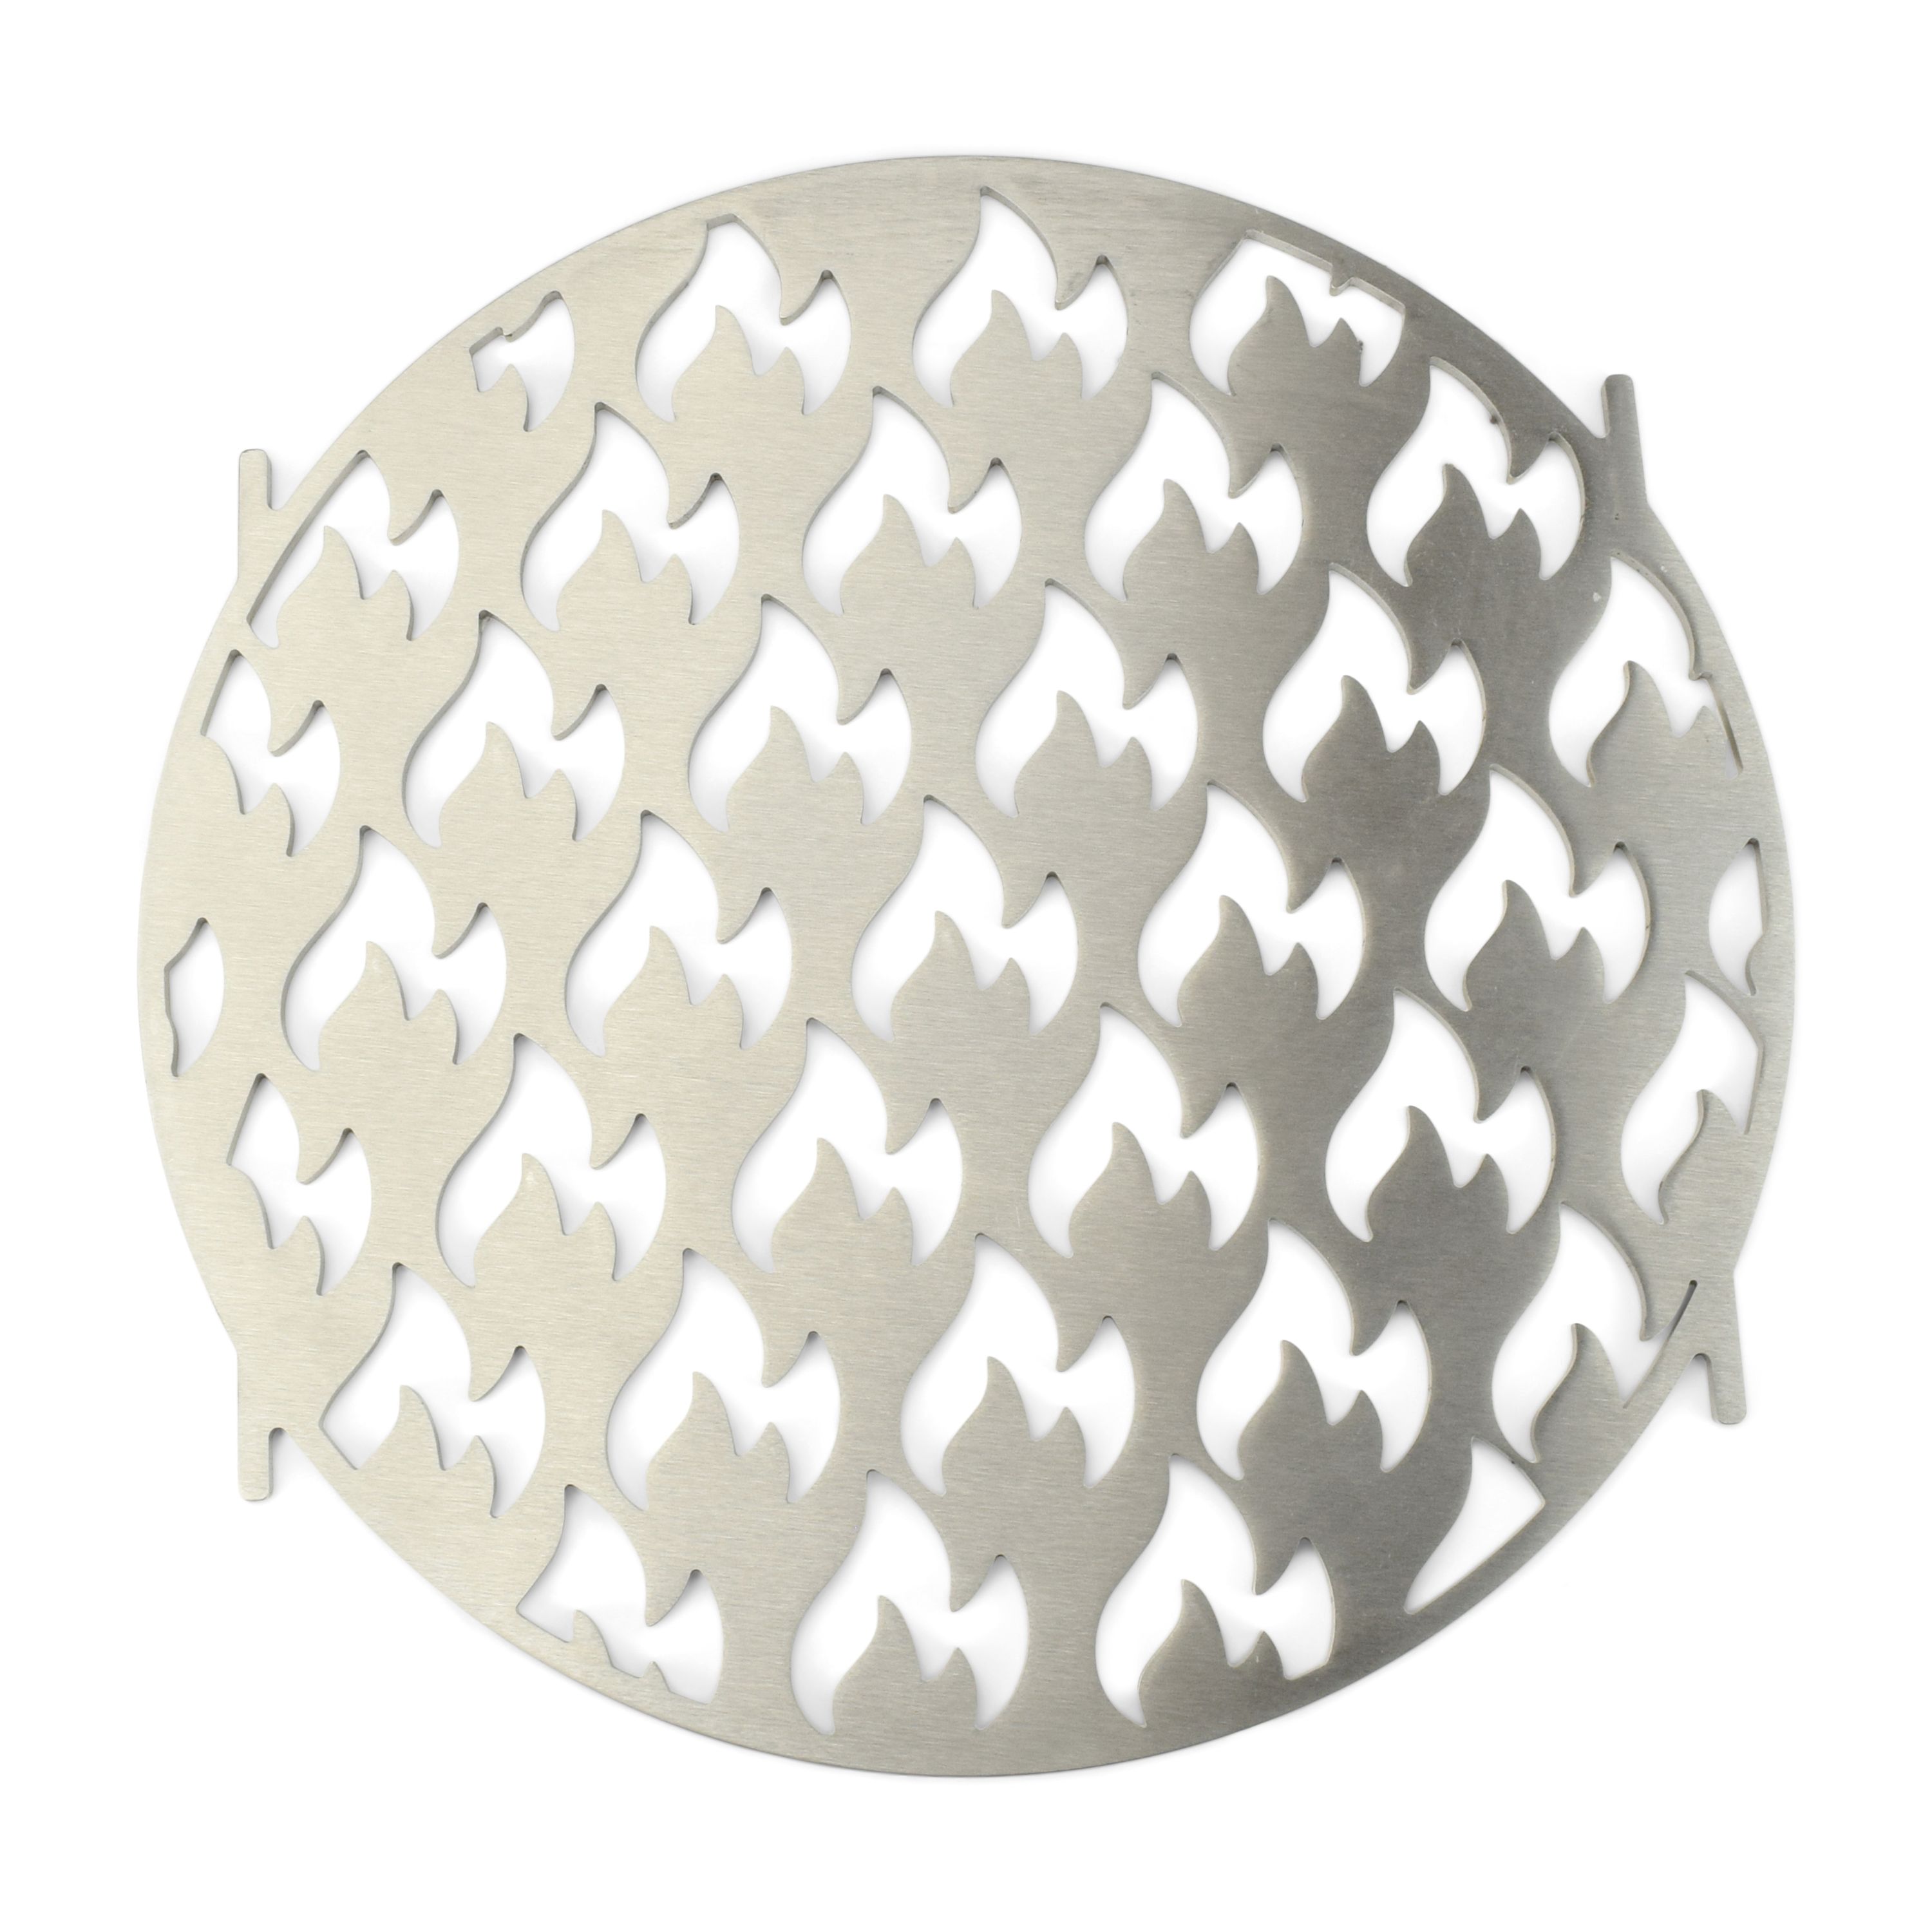 Stainless steel grill insert with flame pattern